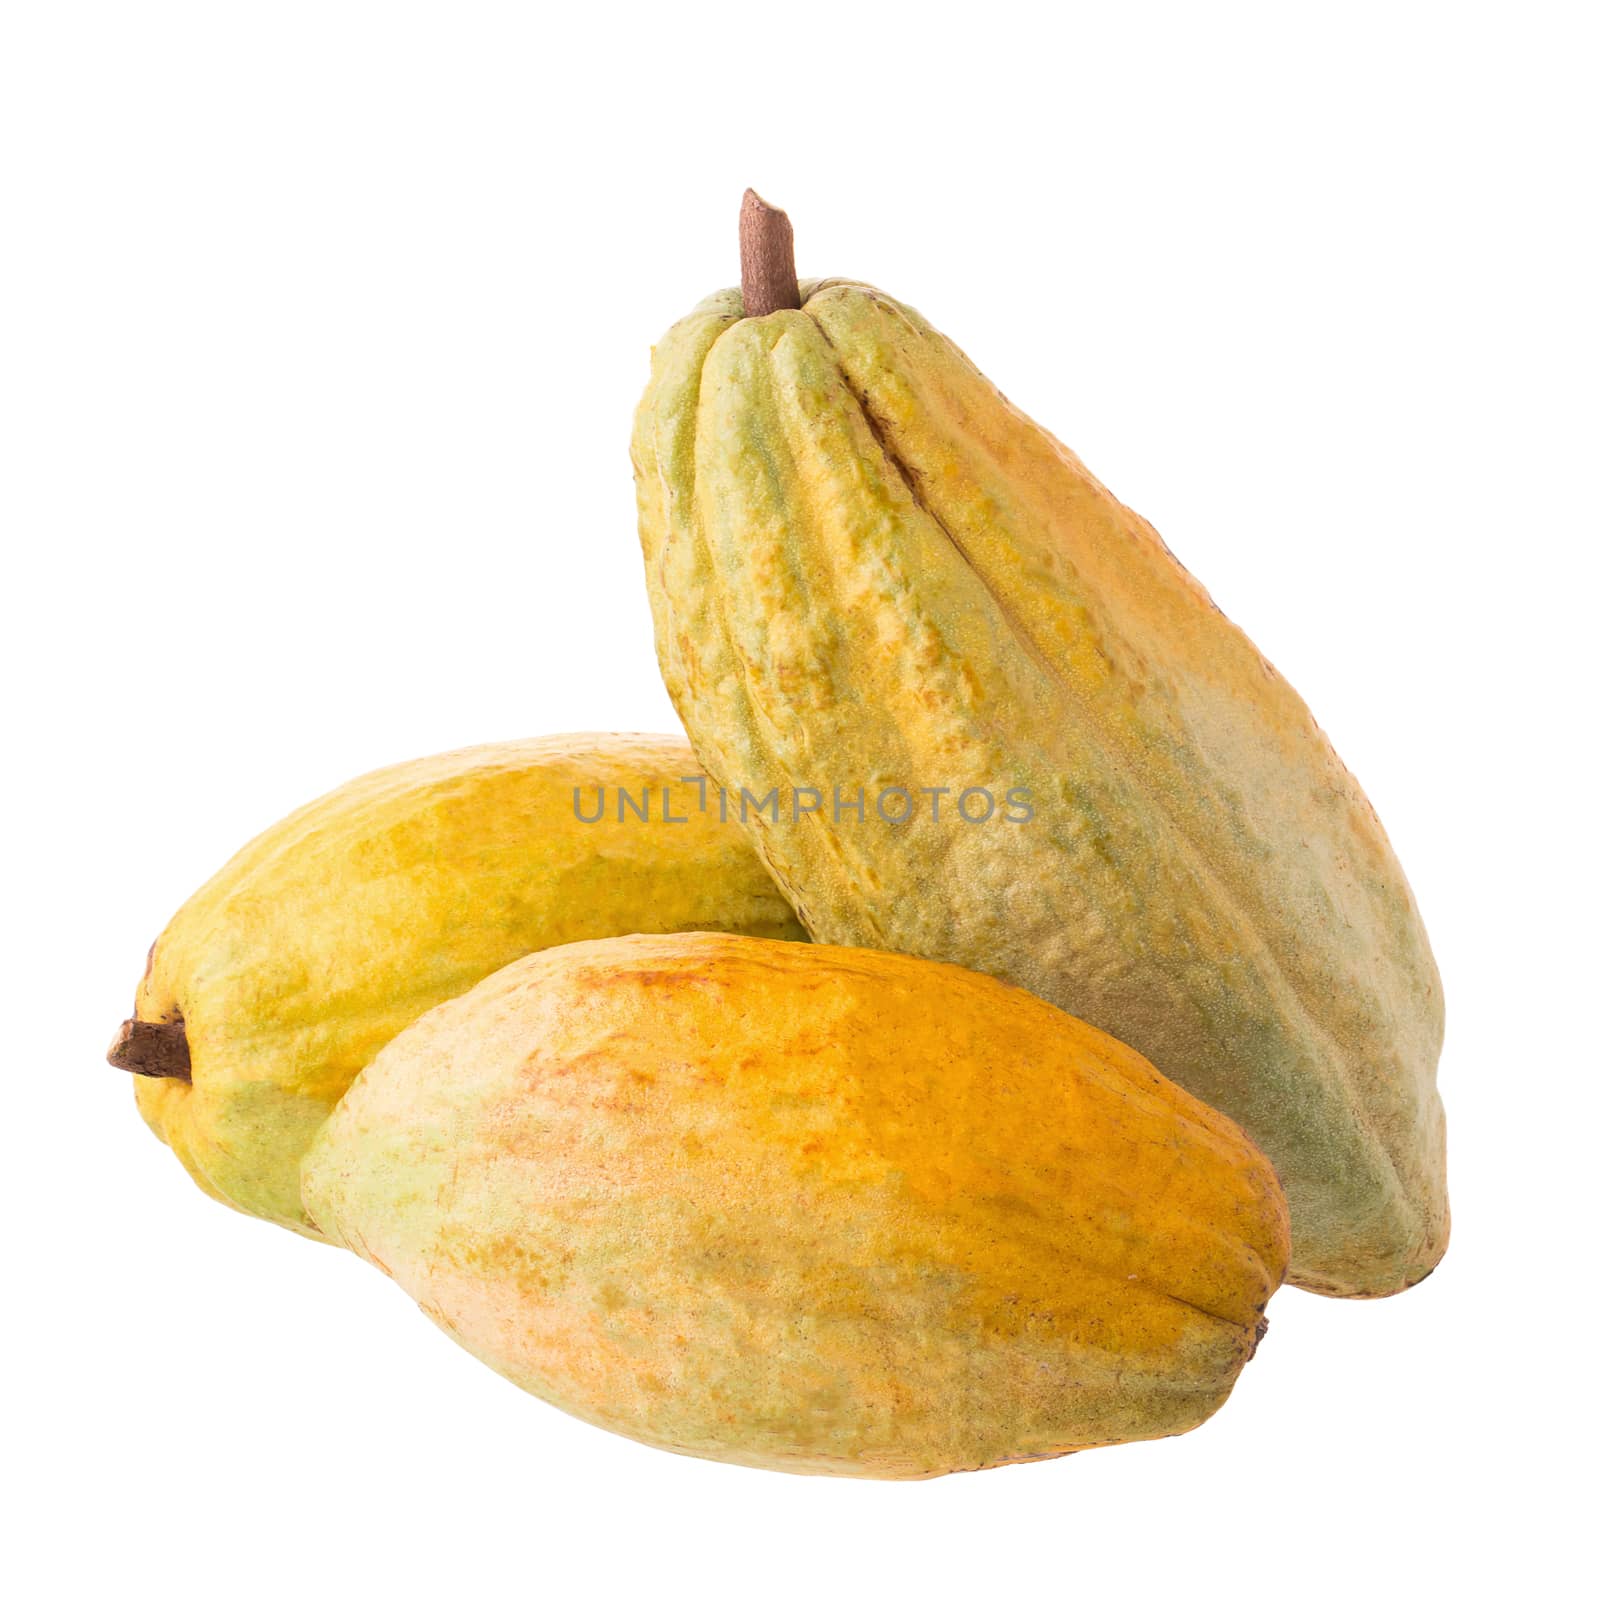 Cacao fruit, raw cacao beans, Cocoa pod on white background. by kaiskynet